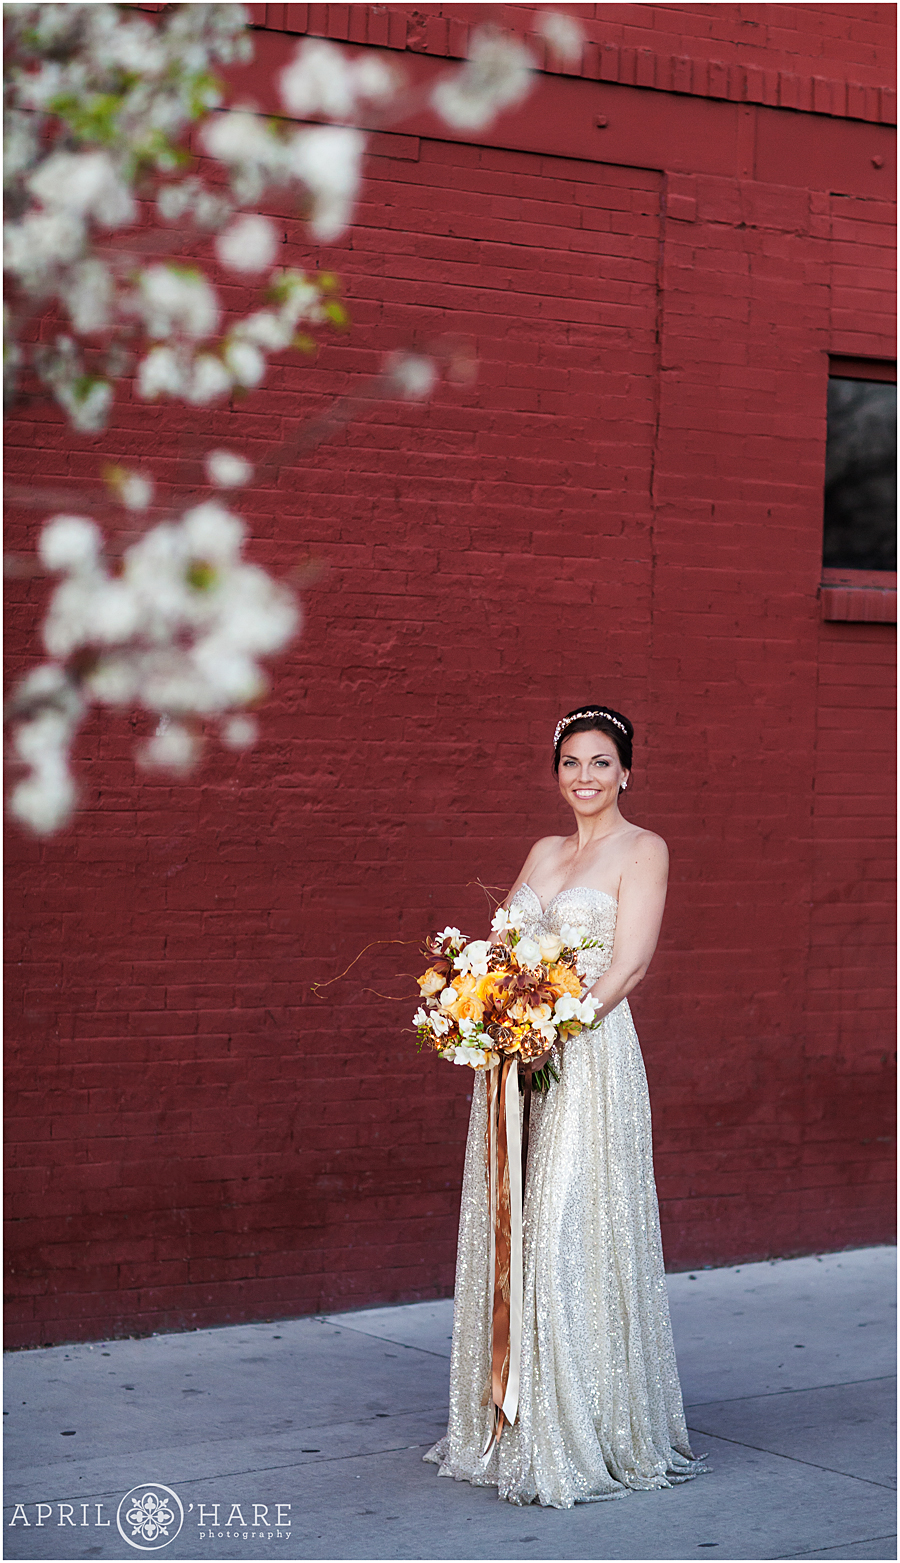 Sparkly wedding styled shoot with Gold Wedding Inspiration